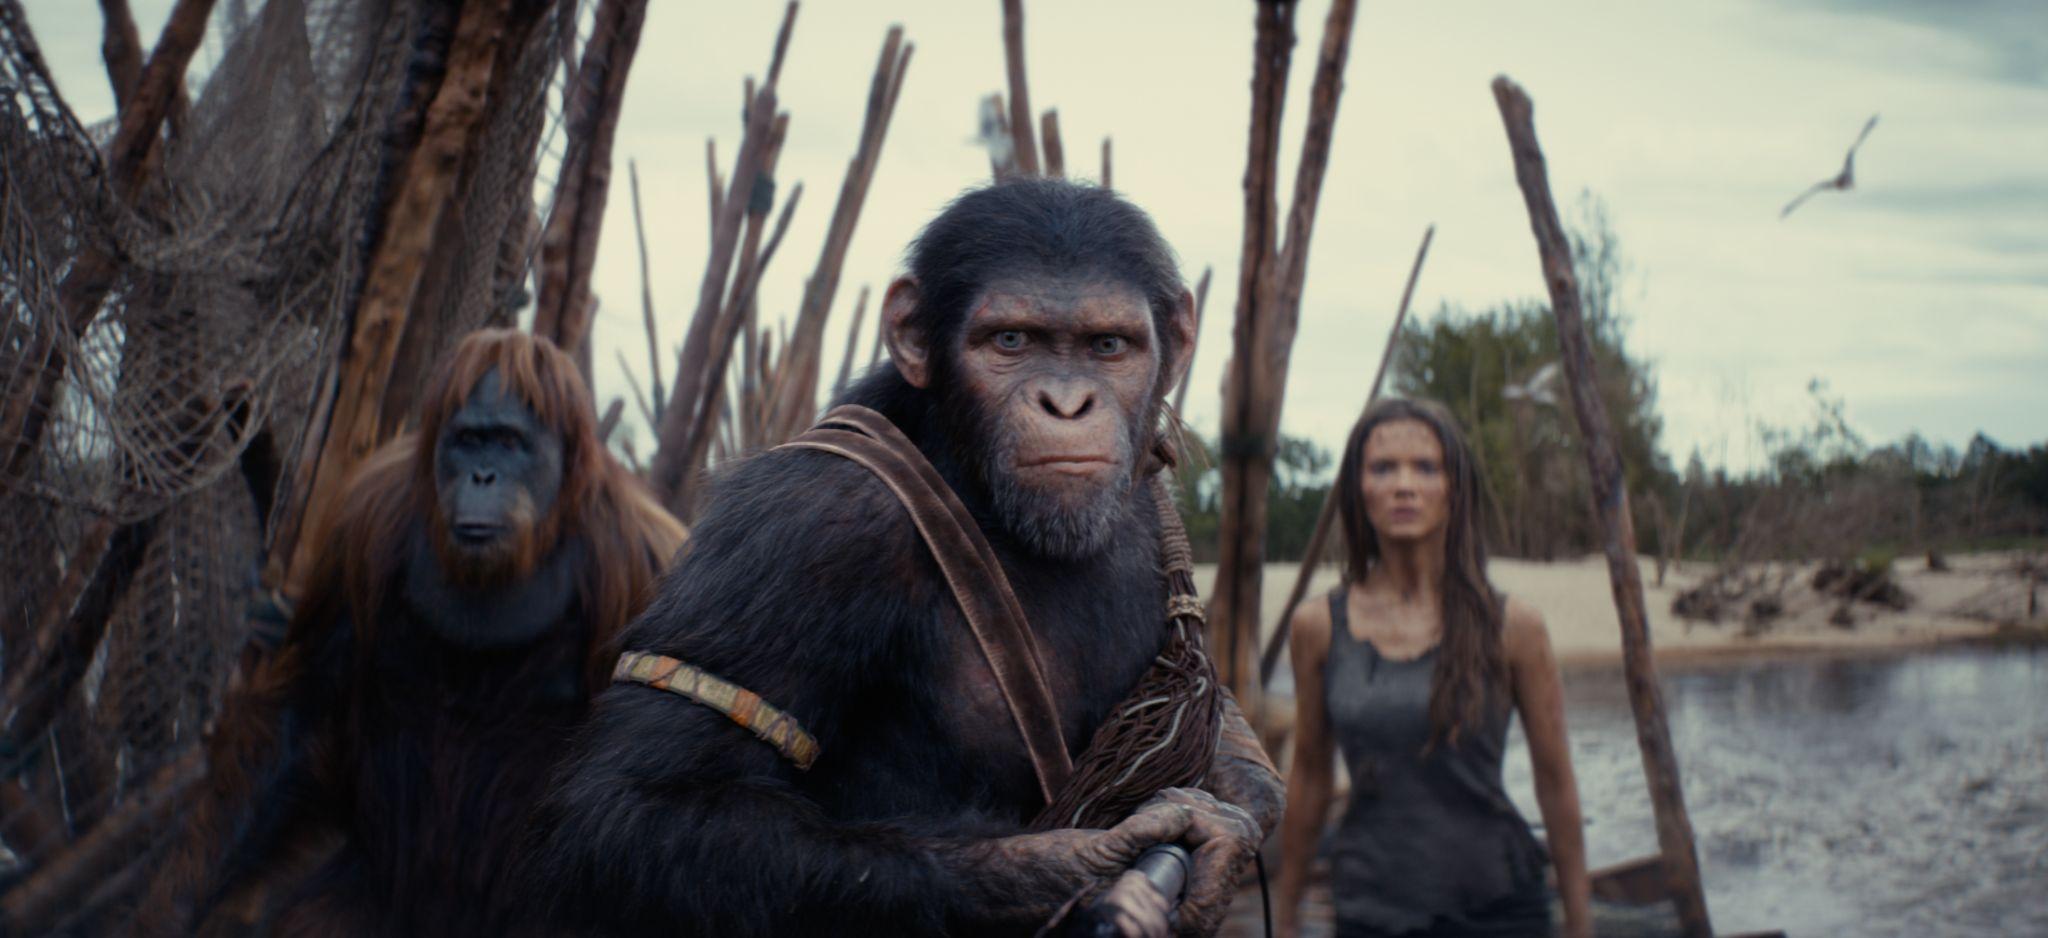 Humans and Apes Collide Again This Week in "KINGDOM OF THE PLANET OF THE APES" in Cinemas on May 8, 2024